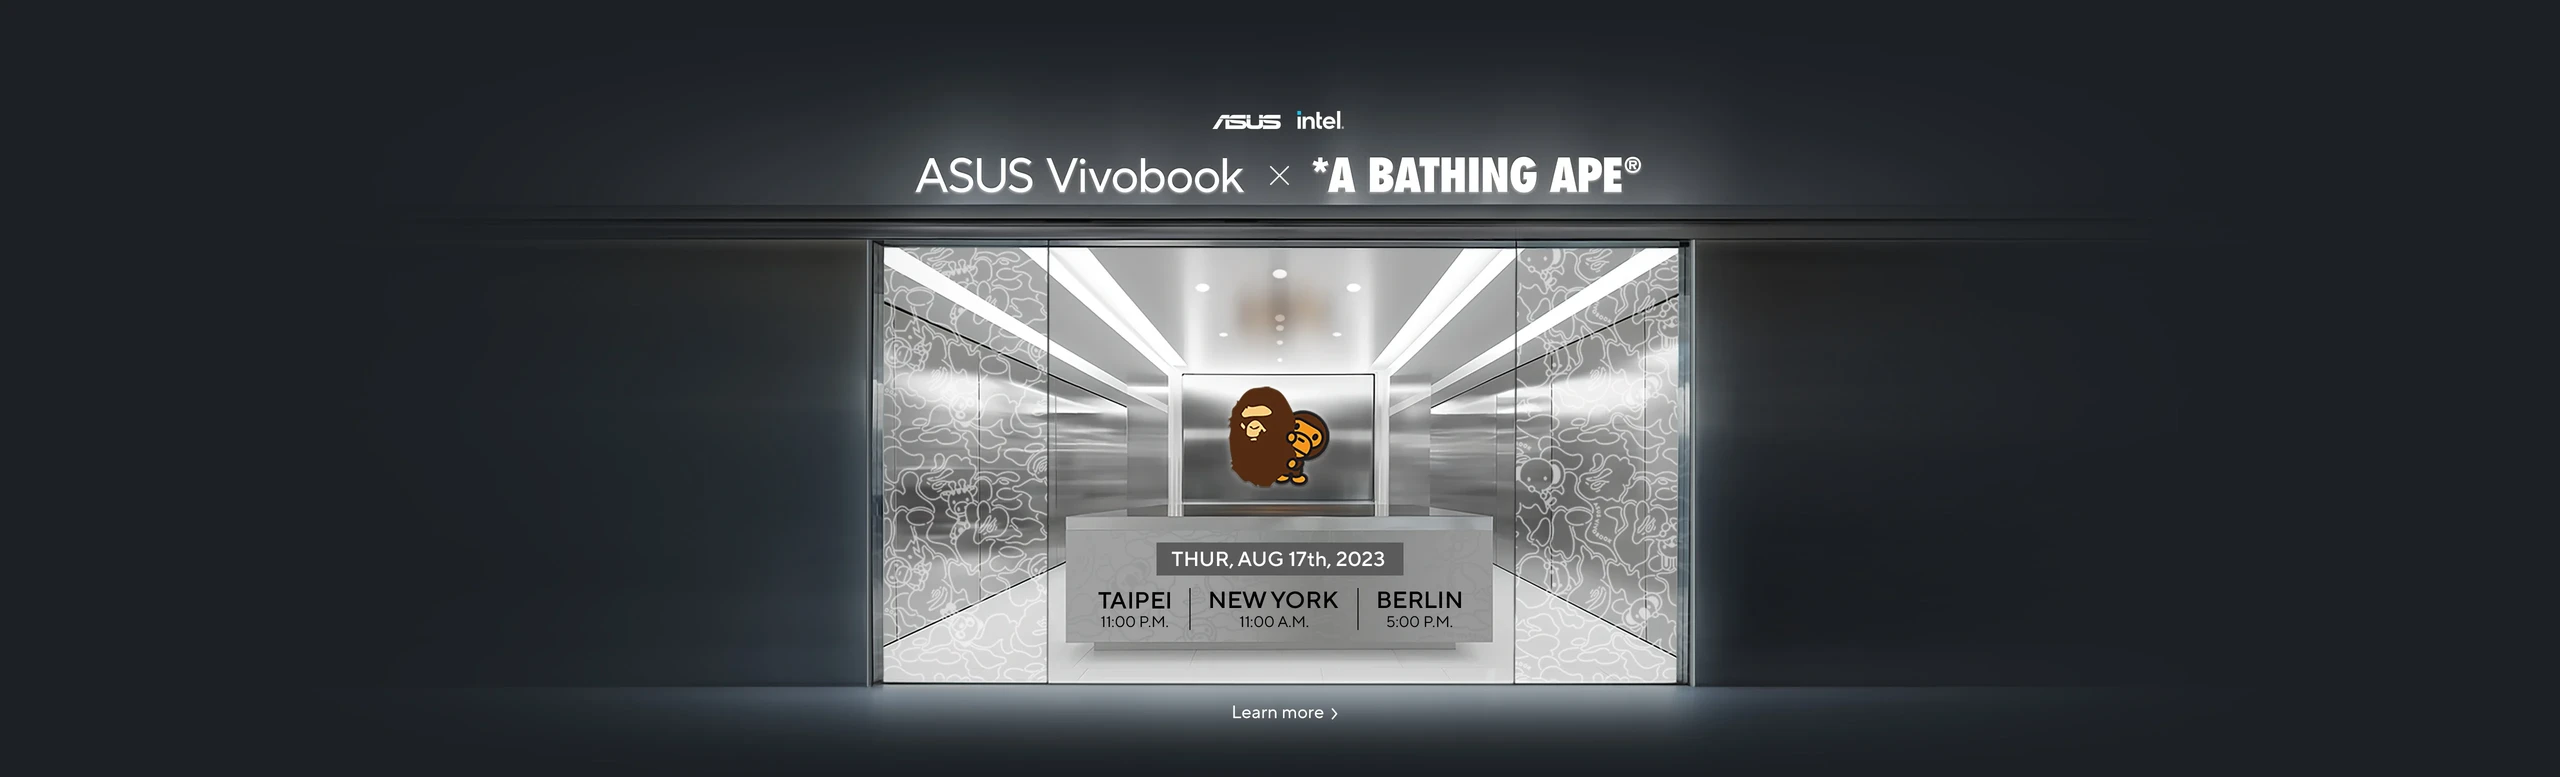 The visual shows the grey store with ASUS Vivobook and BAPE collaboration logo together with the launch date Thursday, August 17th, 2023, TAIPEI 11pm, NEW YORK 11am, BERLIN 5pm.